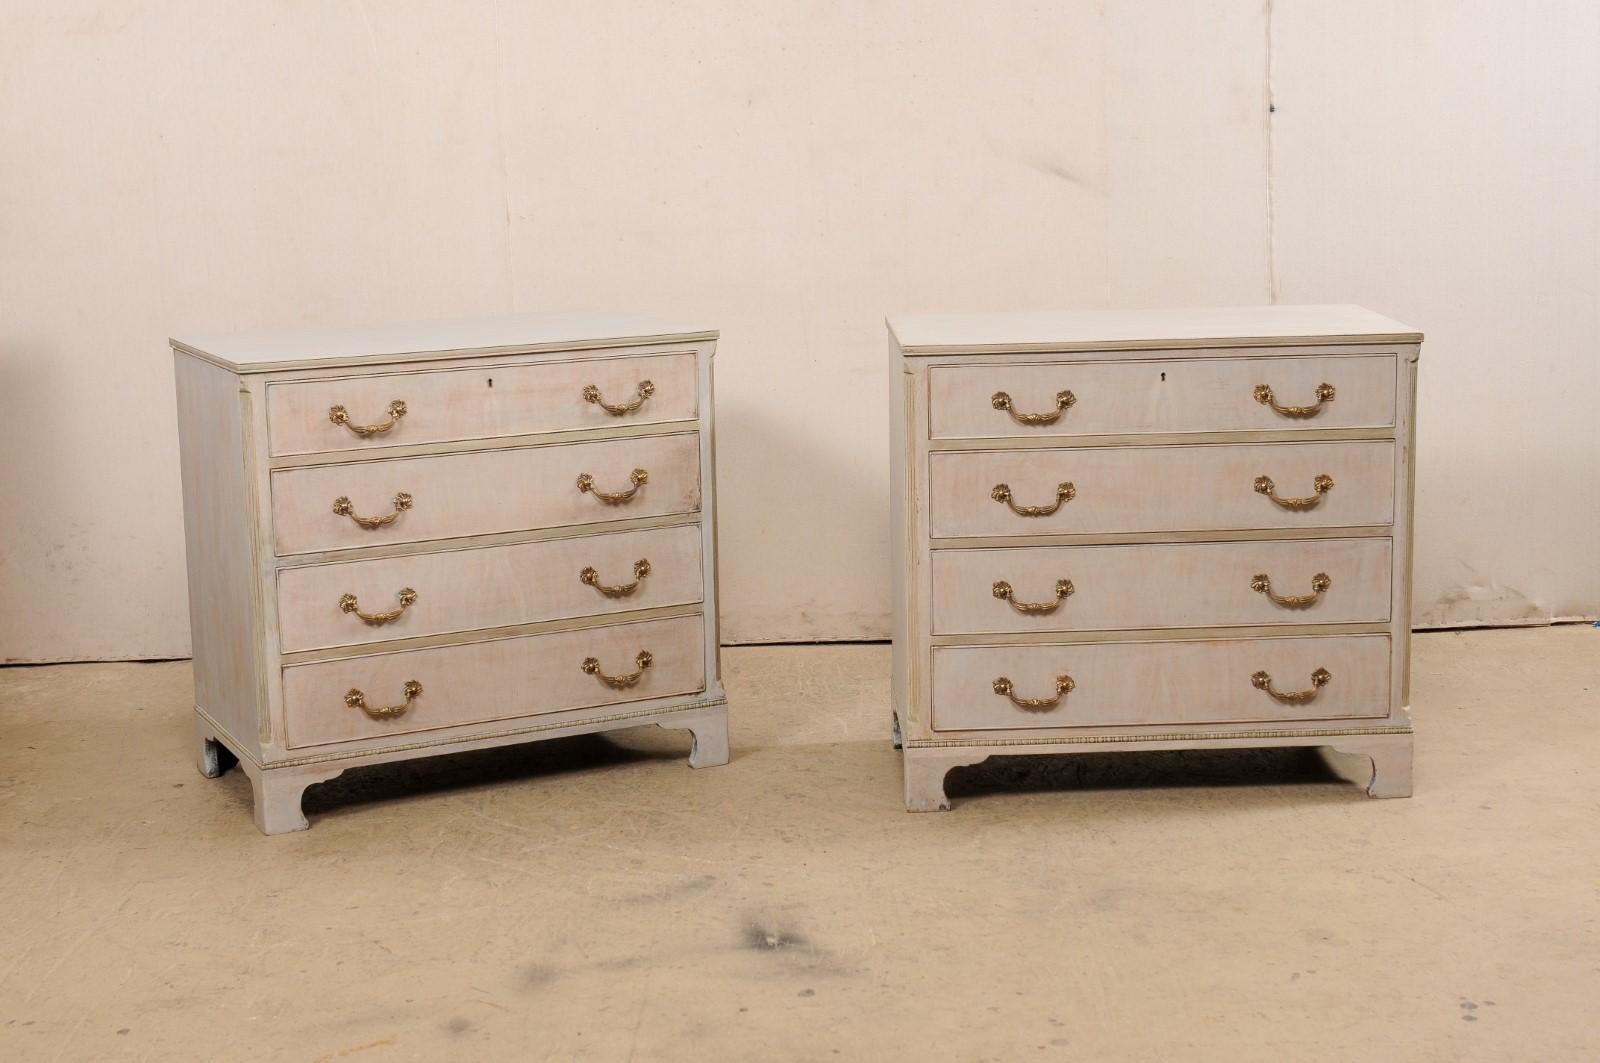 A pair of painted wood chests from American furniture maker Kittinger Furniture. These vintage made-in-America chests each feature a rectangular-shaped top over a has which houses four graduated and dove-tailed drawers, set within canted and